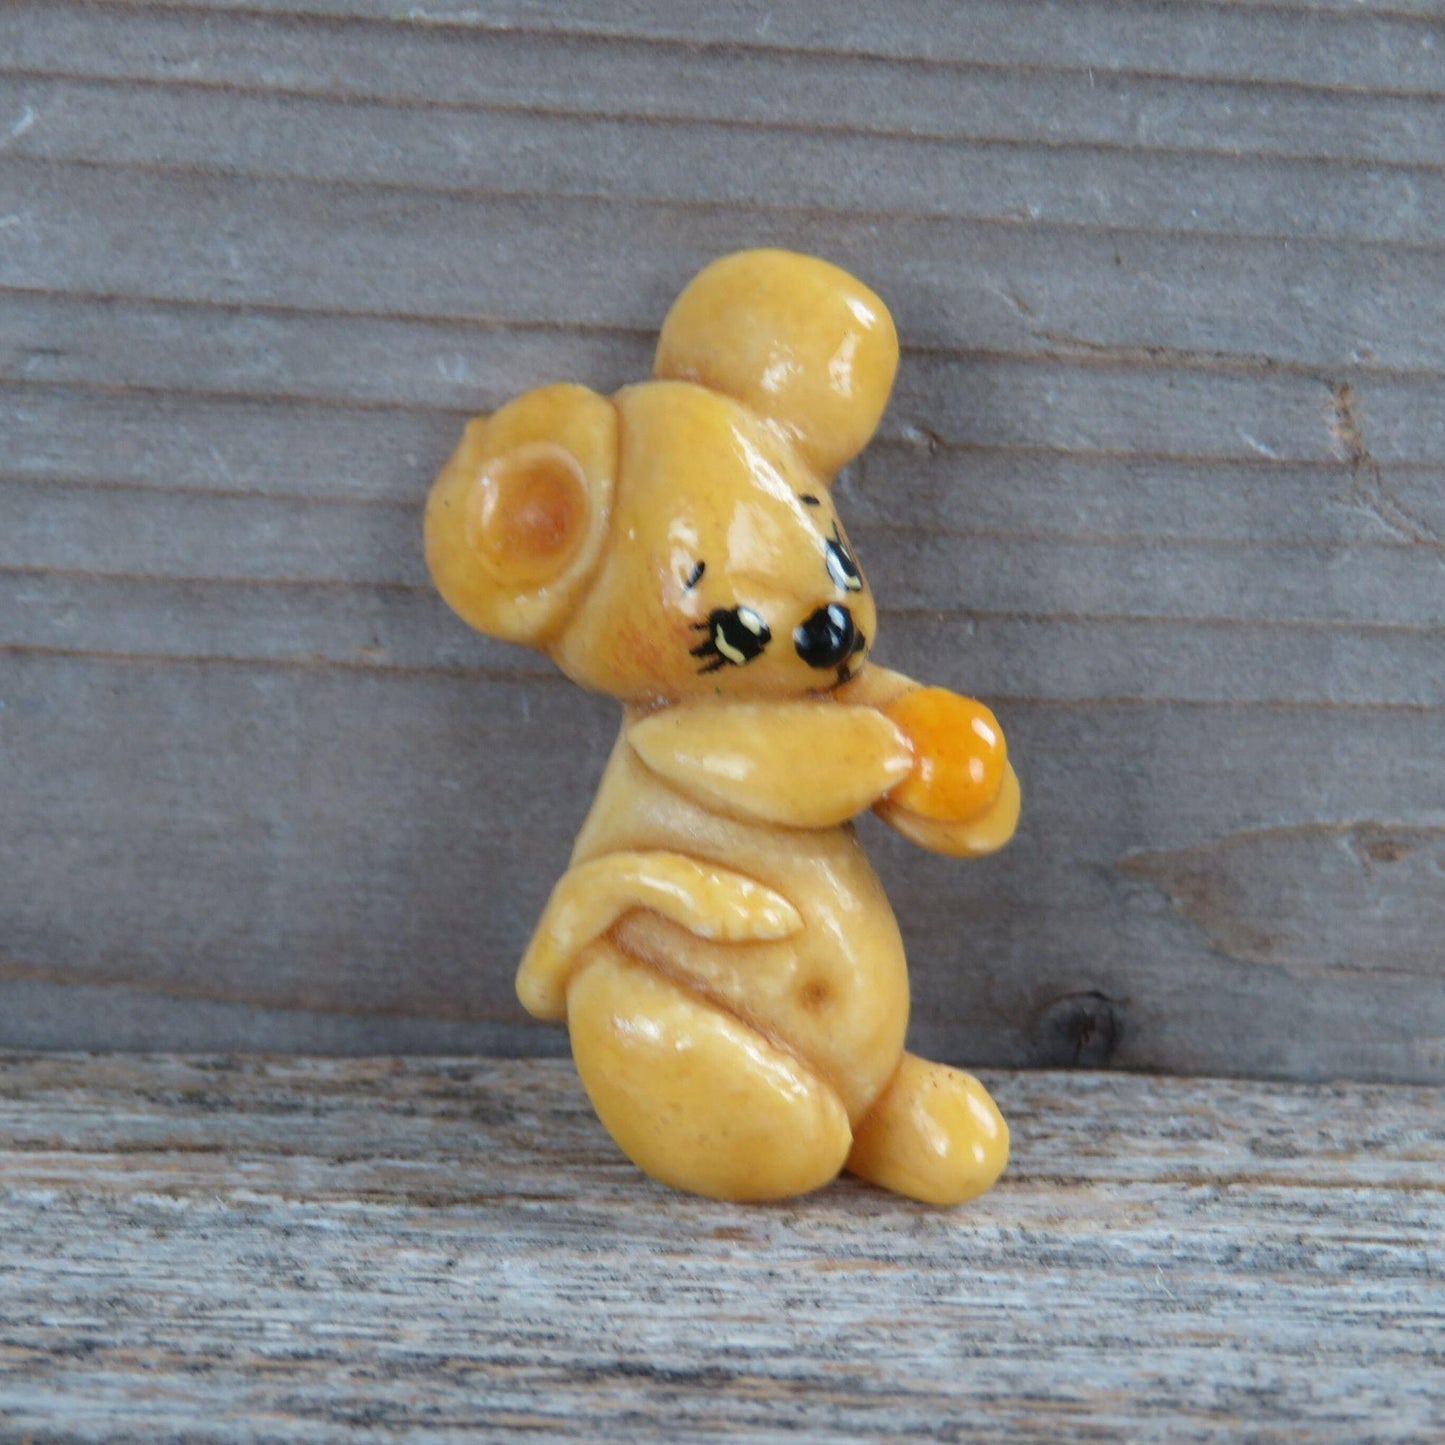 Vintage Mouse Bread Dough Pin Brooch Cheese Art Handmade Clay Sculpted